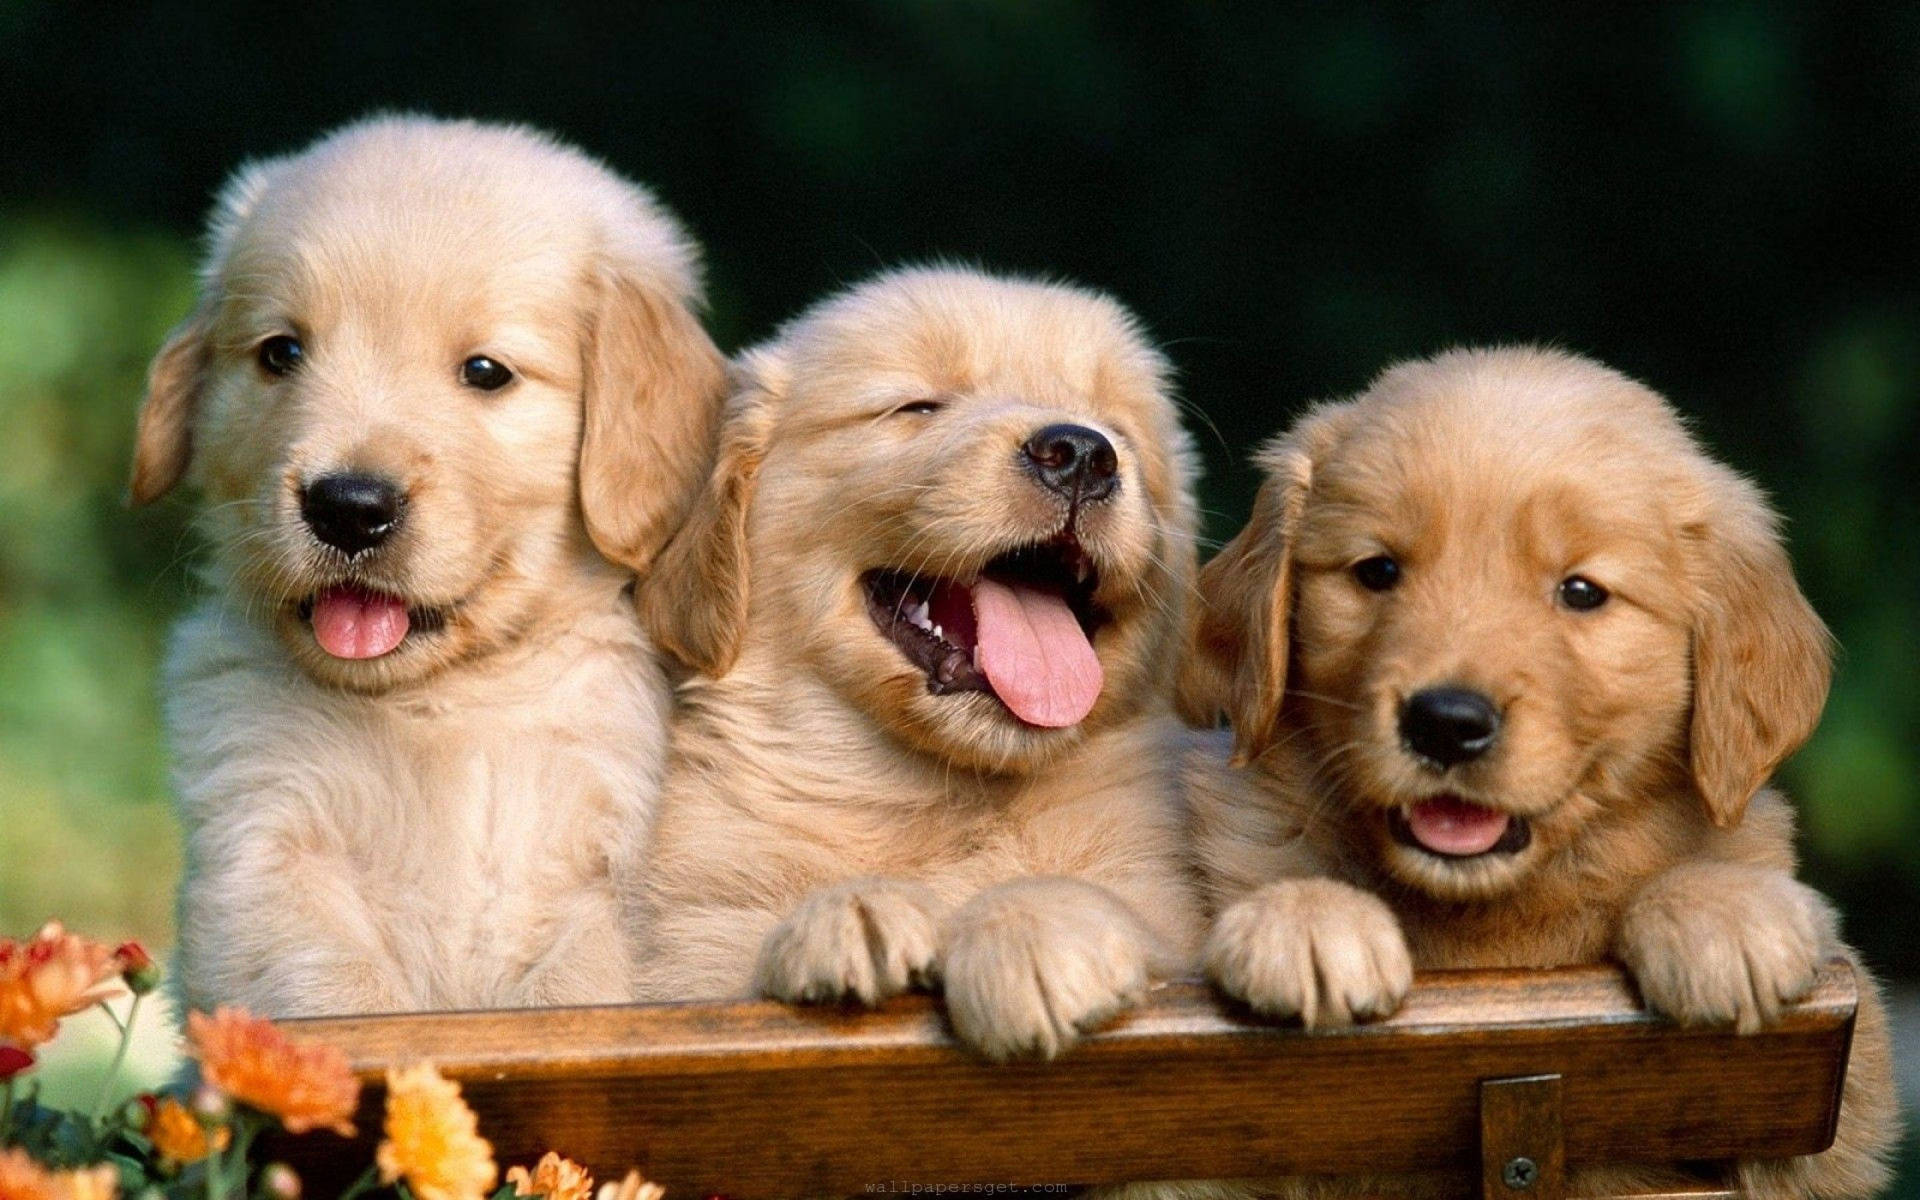 Free Cute Dog Wallpaper Downloads 400 Cute Dog Wallpapers for FREE   Wallpaperscom